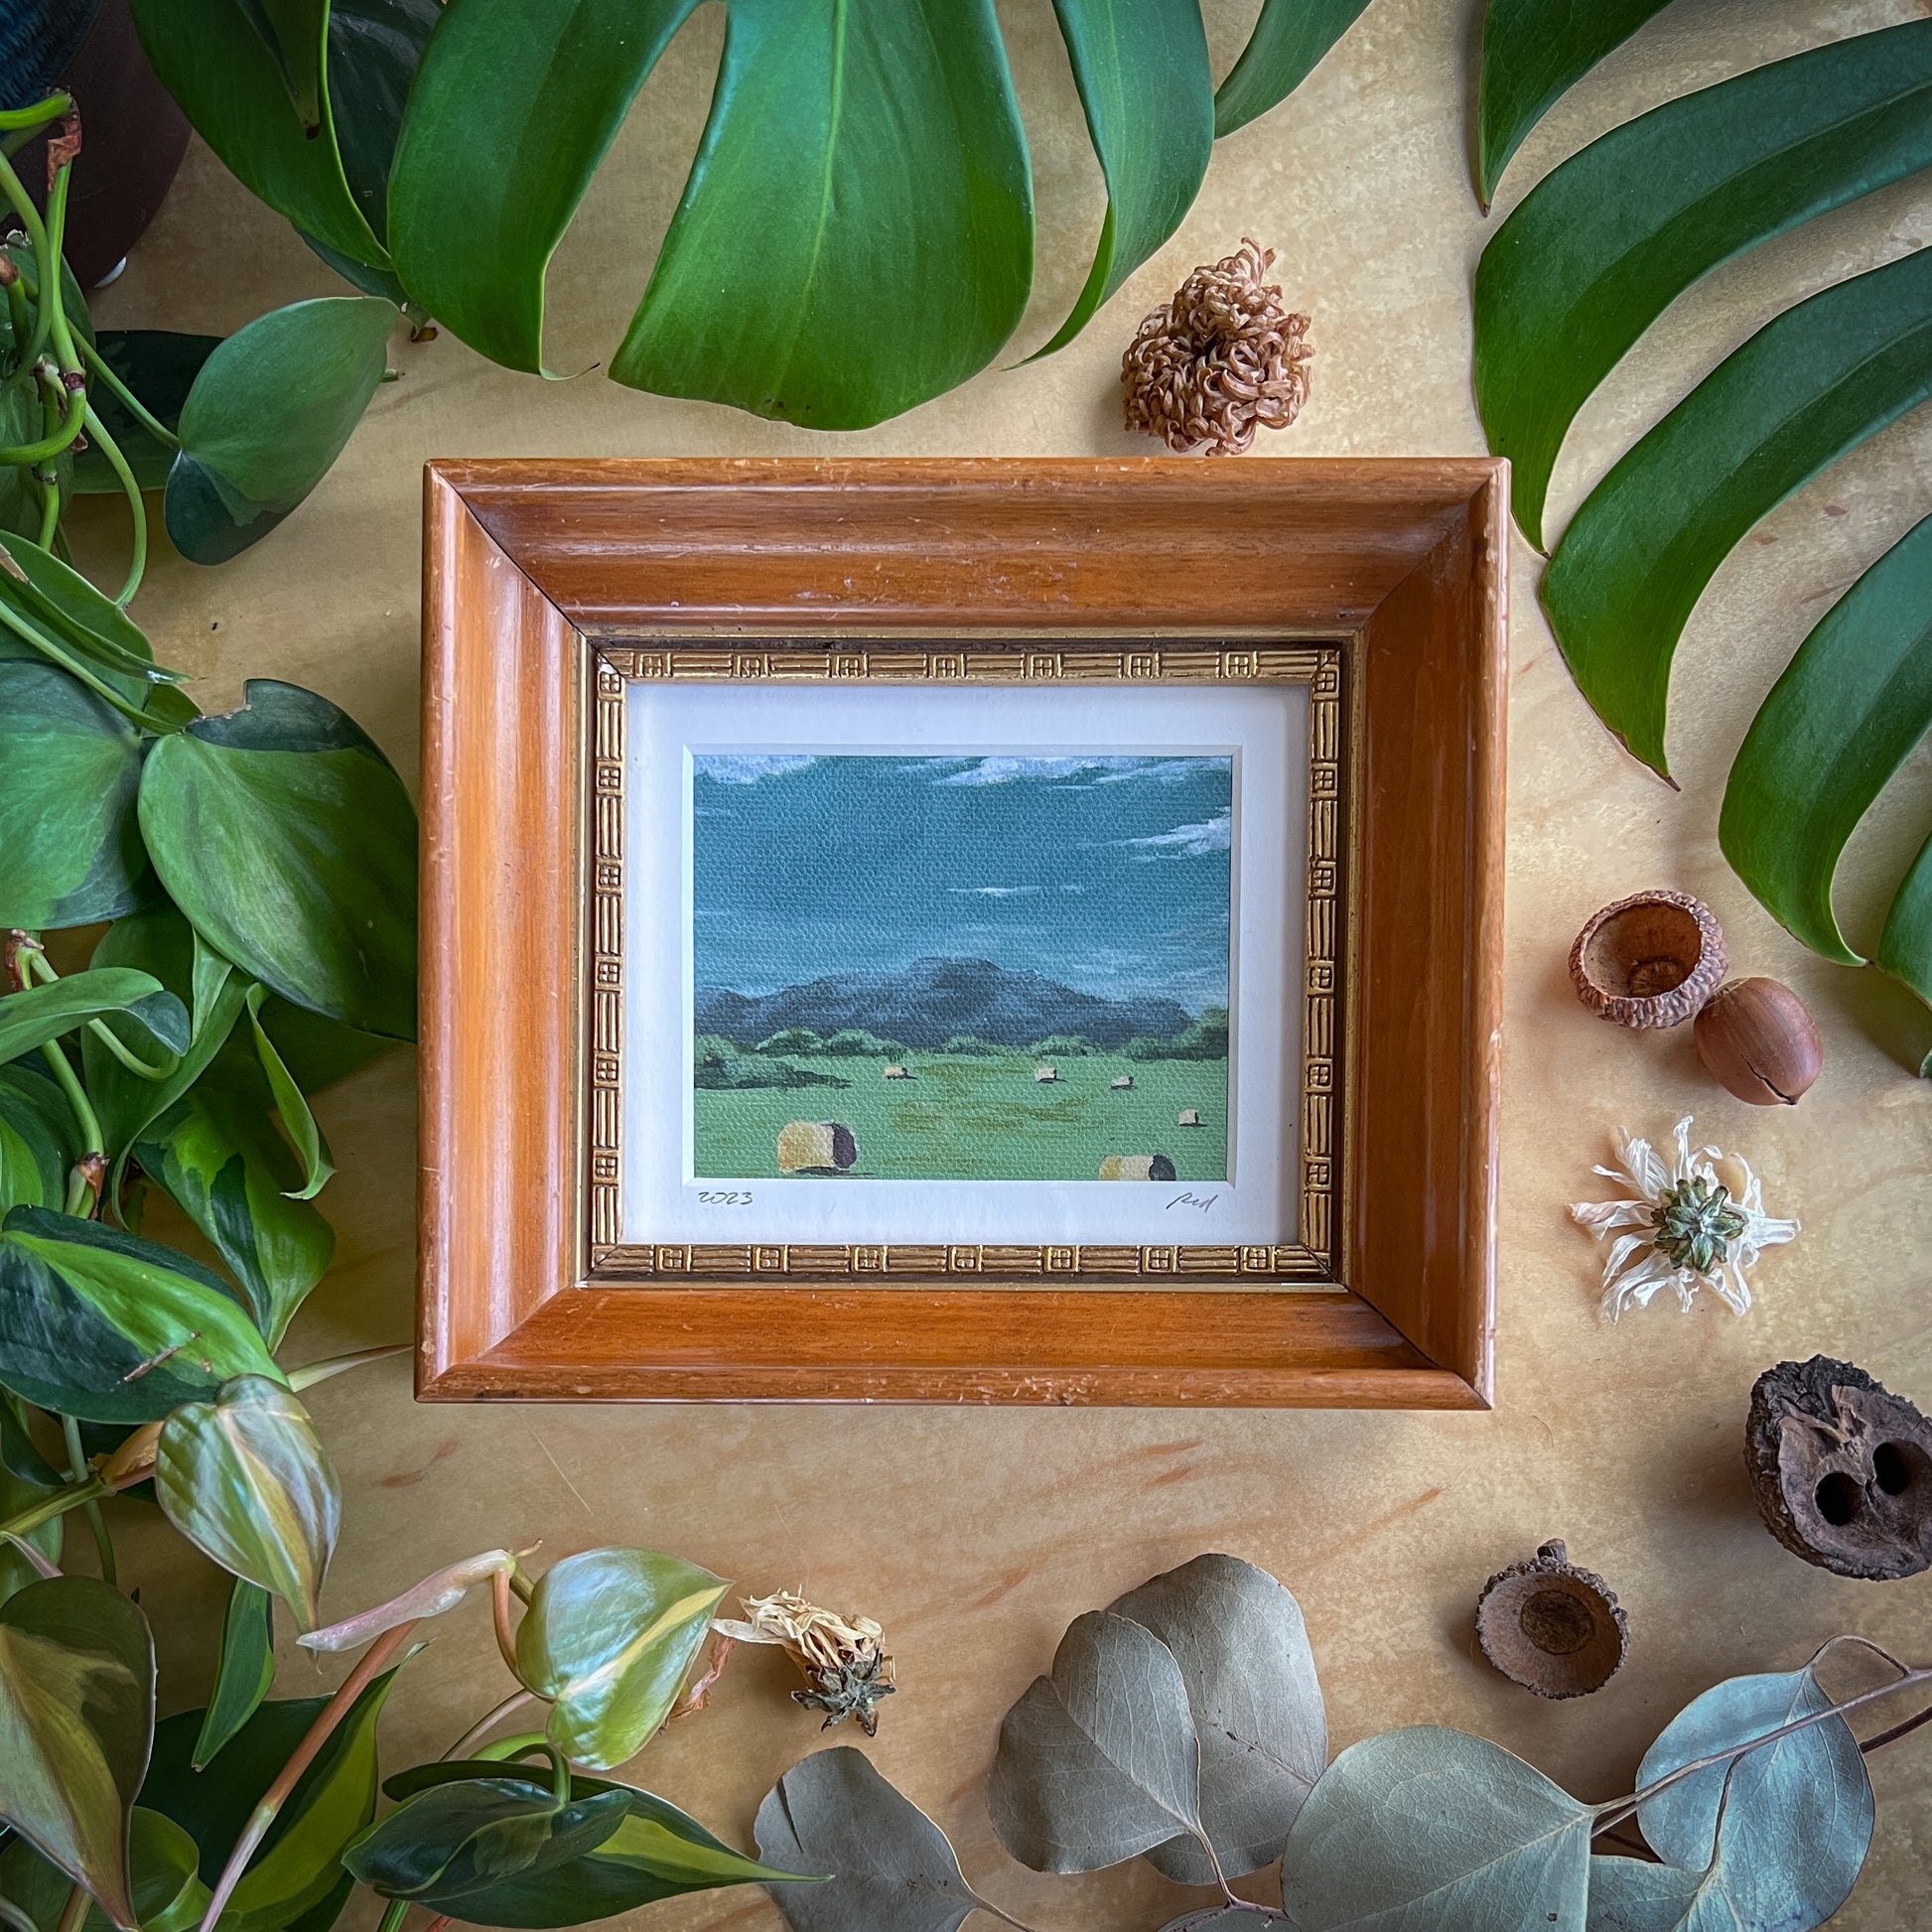 Canvas print of a landscape in a wood frame displayed on a wood table with plants and other natural items scattered around it